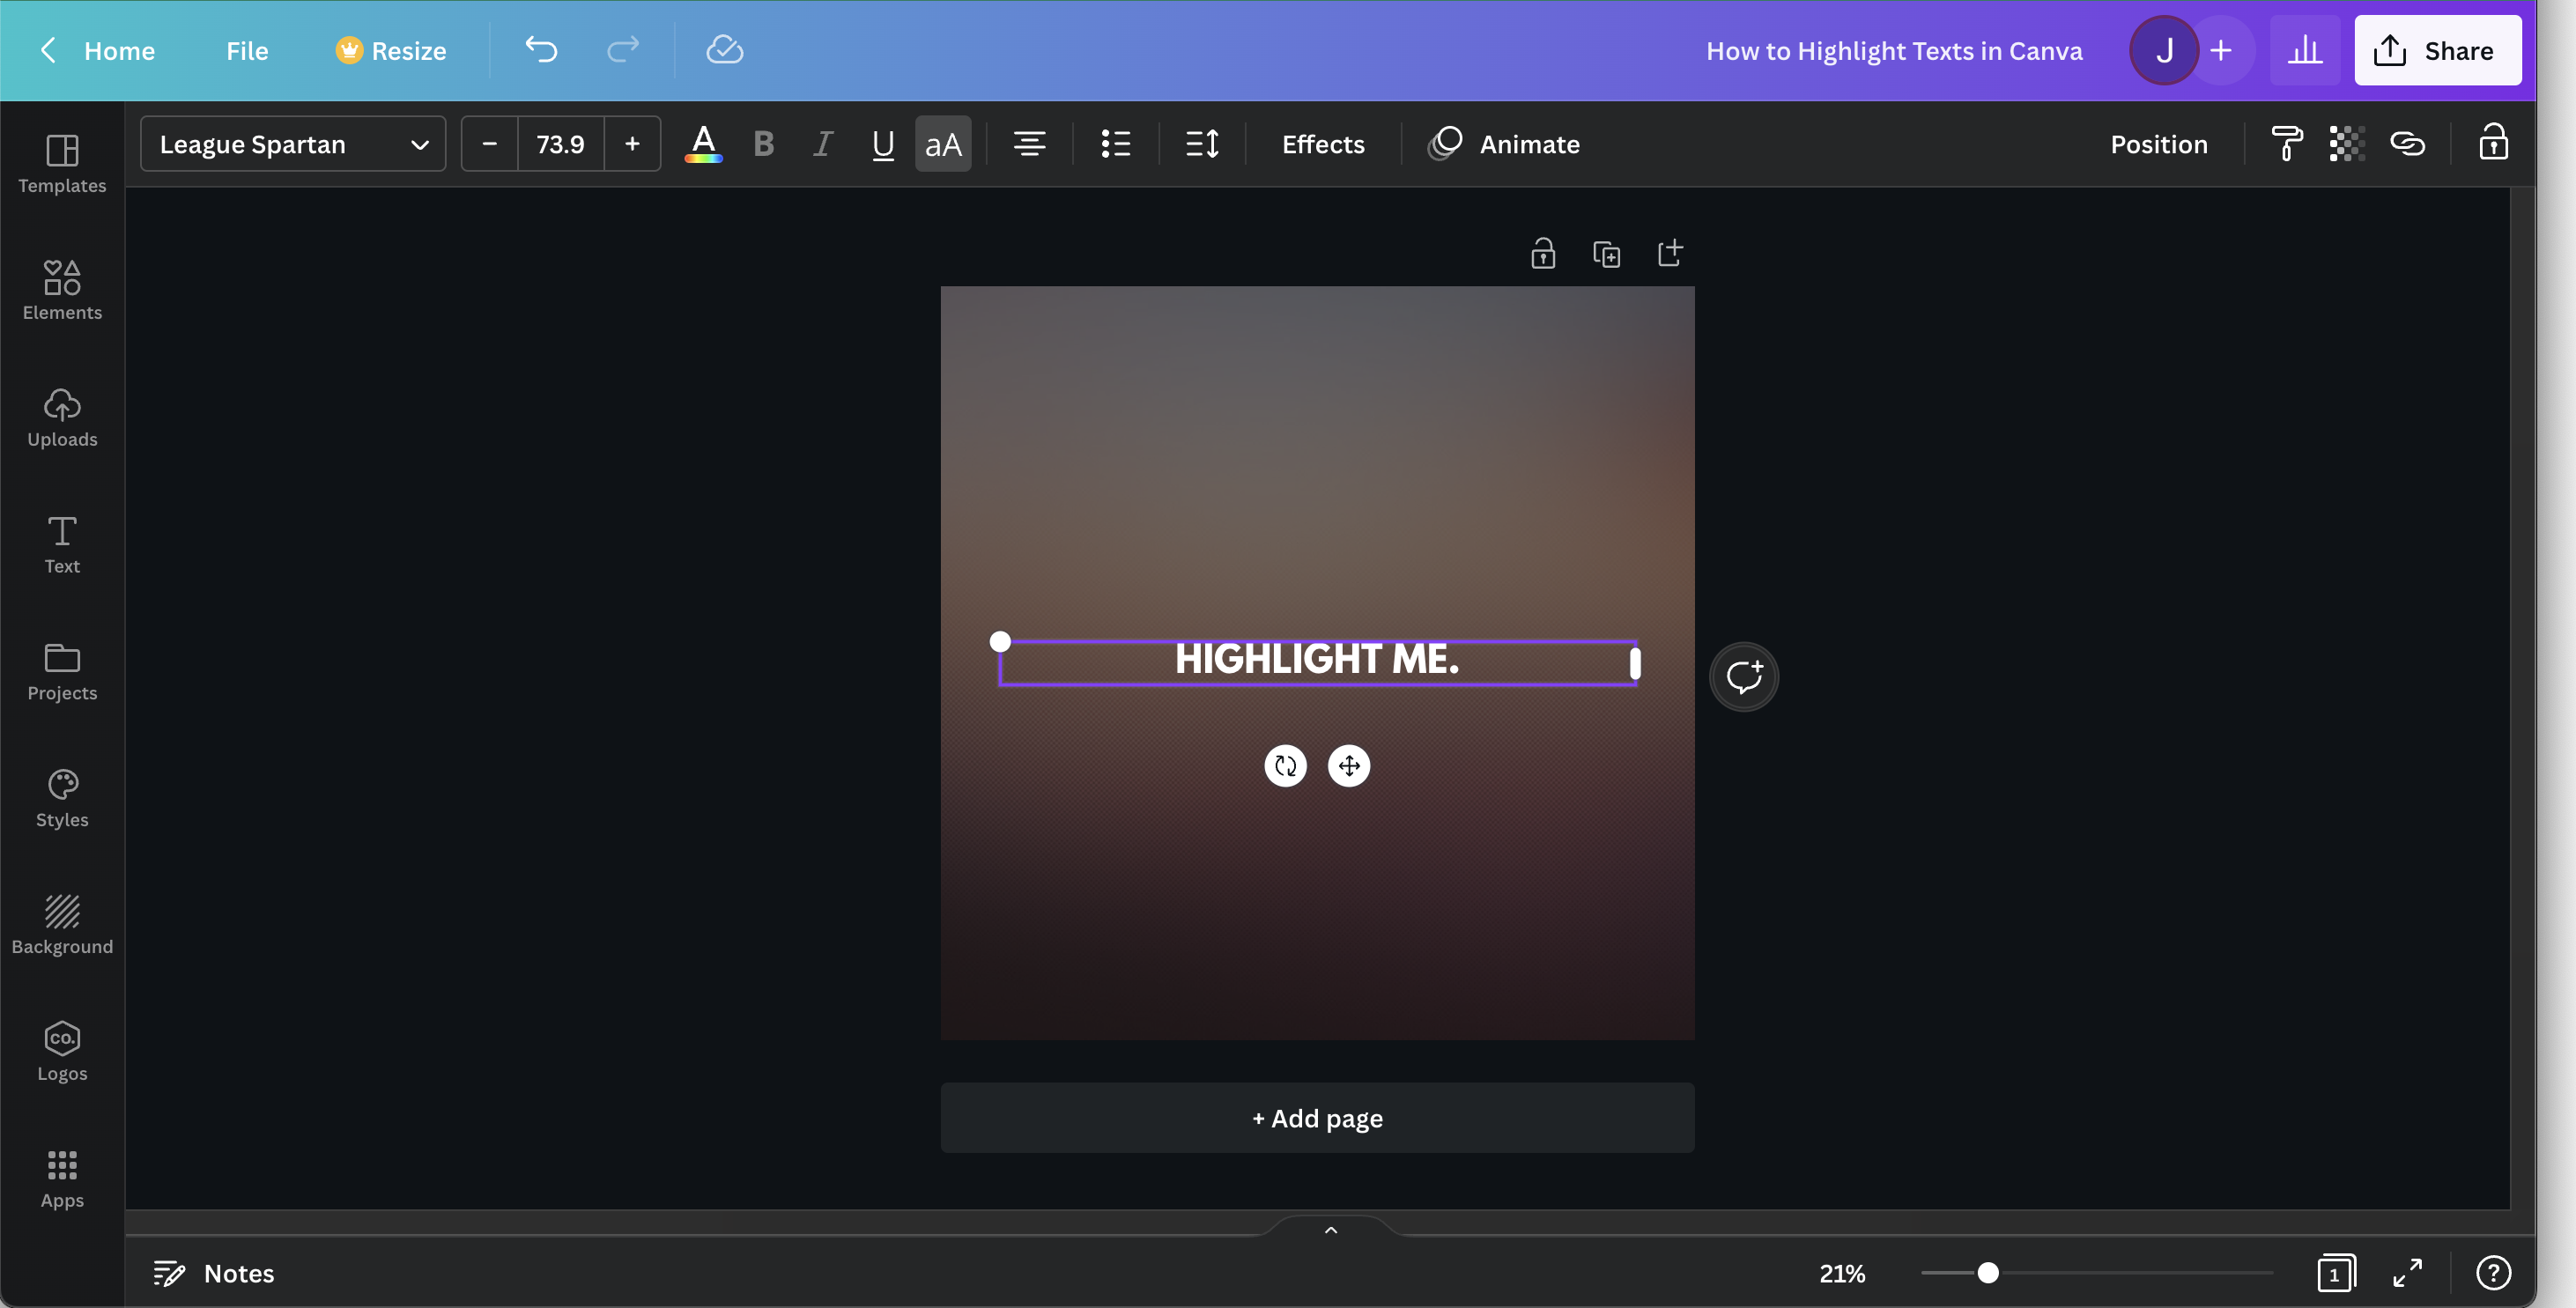 Highlight text in Canva